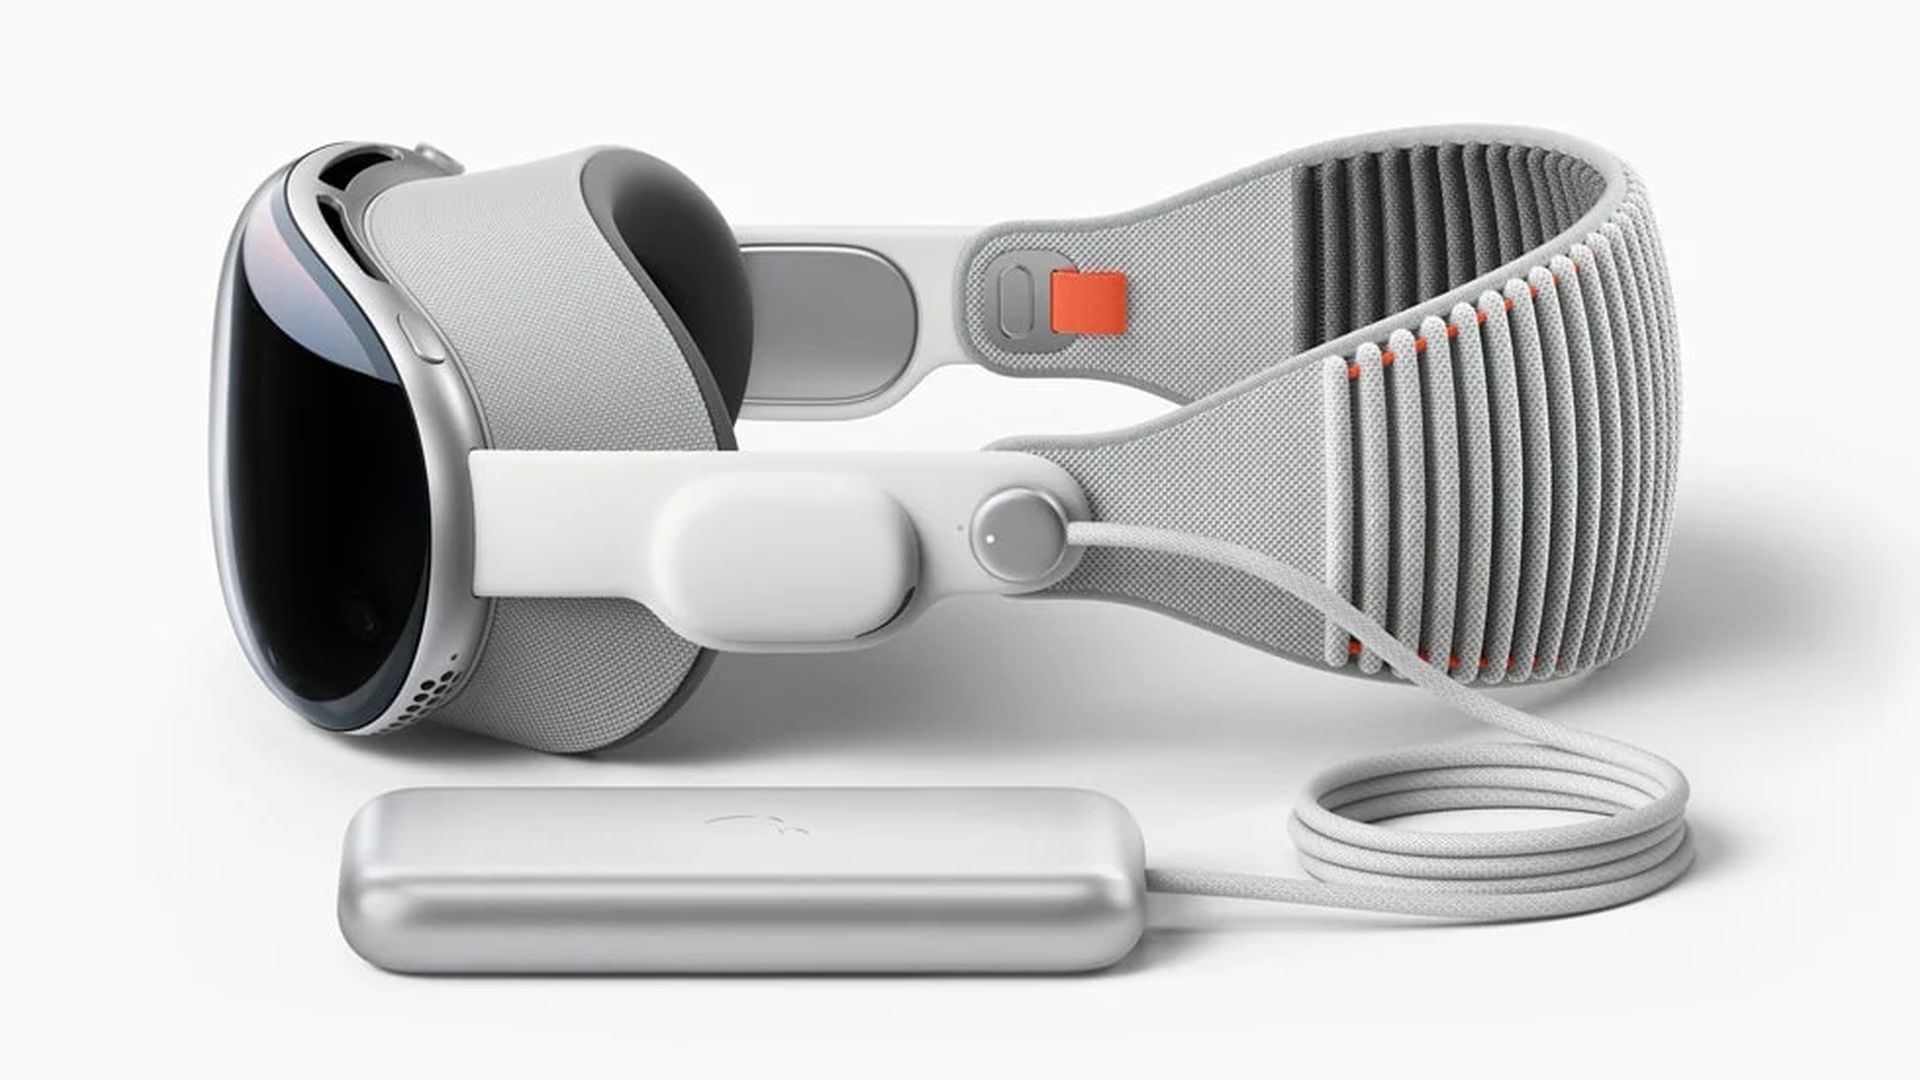 Checkout The Apple's Vision Pro Headset